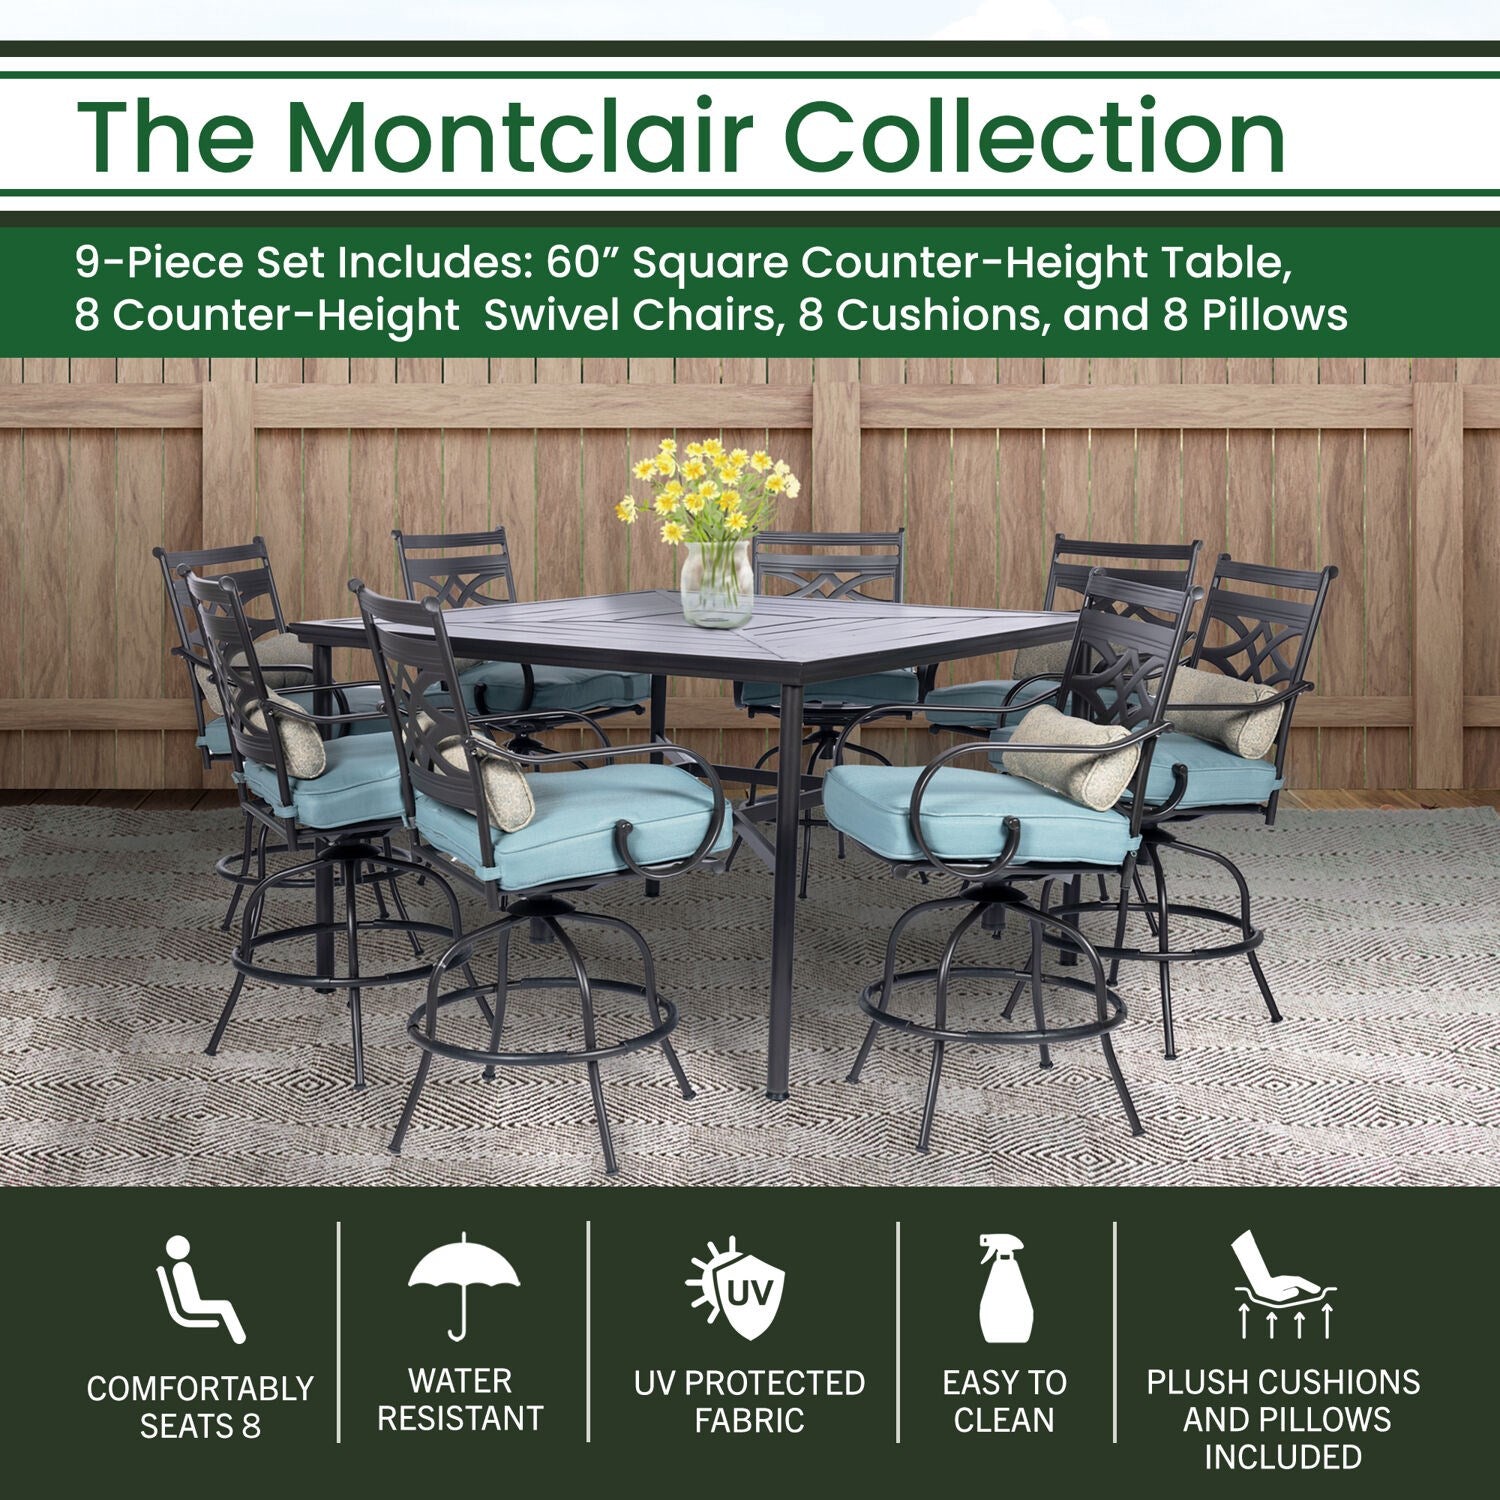 Hanover Montclair 9-piece High Dining | 8 Swivel Chairs | 60" Square High Table - Blue/Brown | MCLRDN9PCBRSW8-BLU